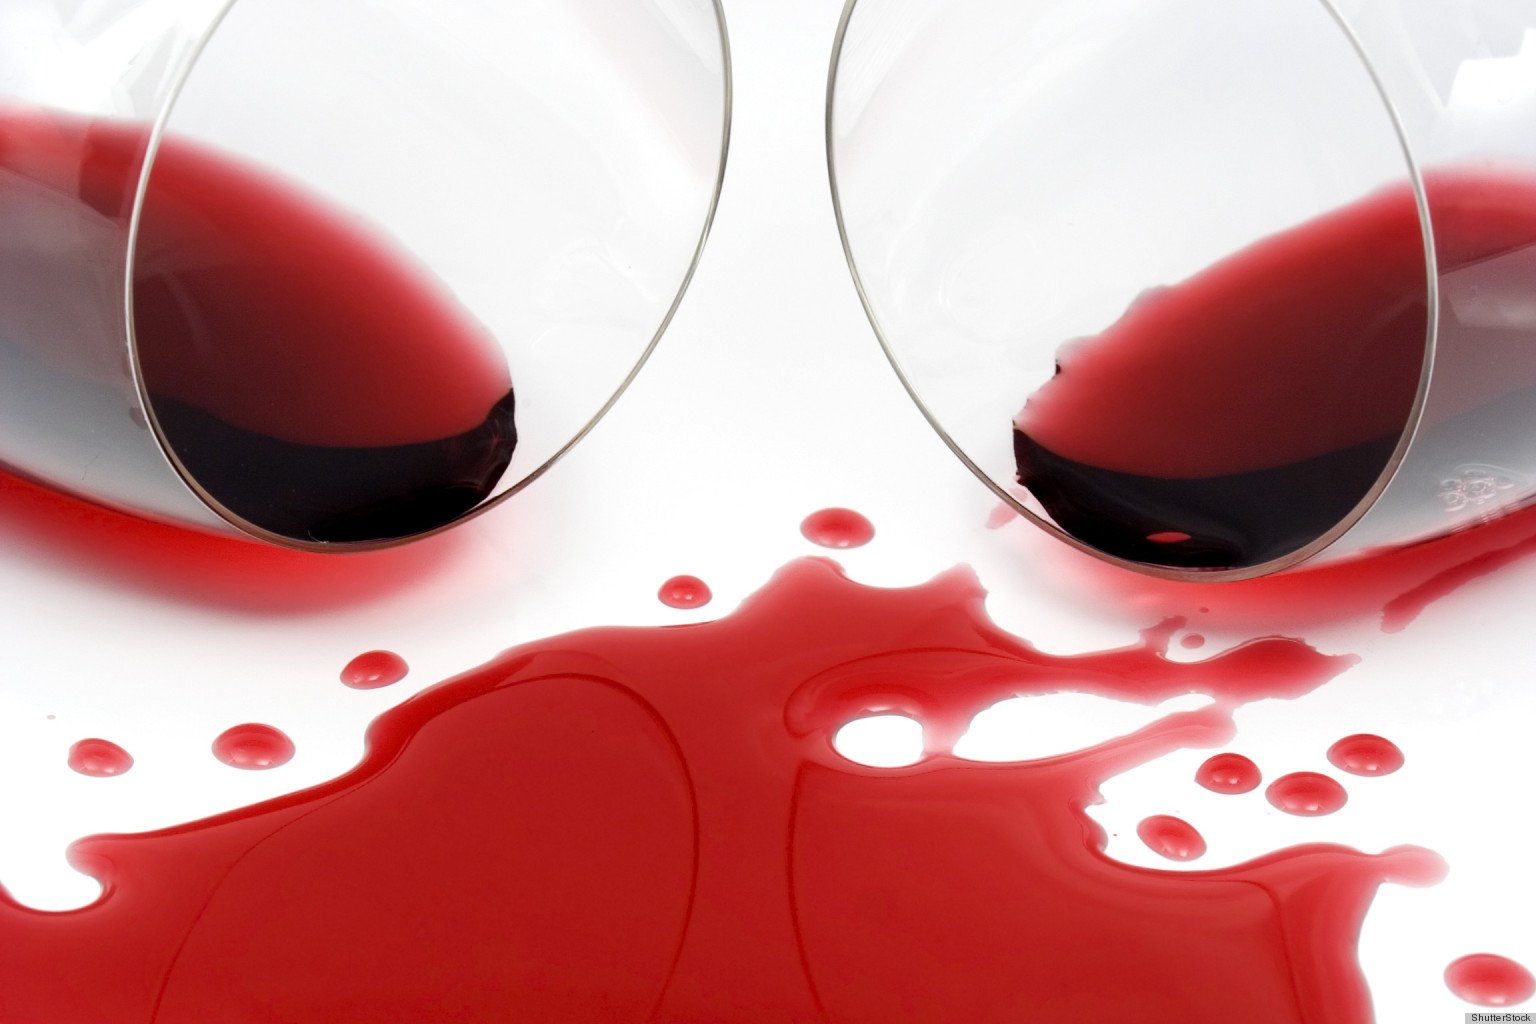 How To Remove Wine Stains From Tablecloth